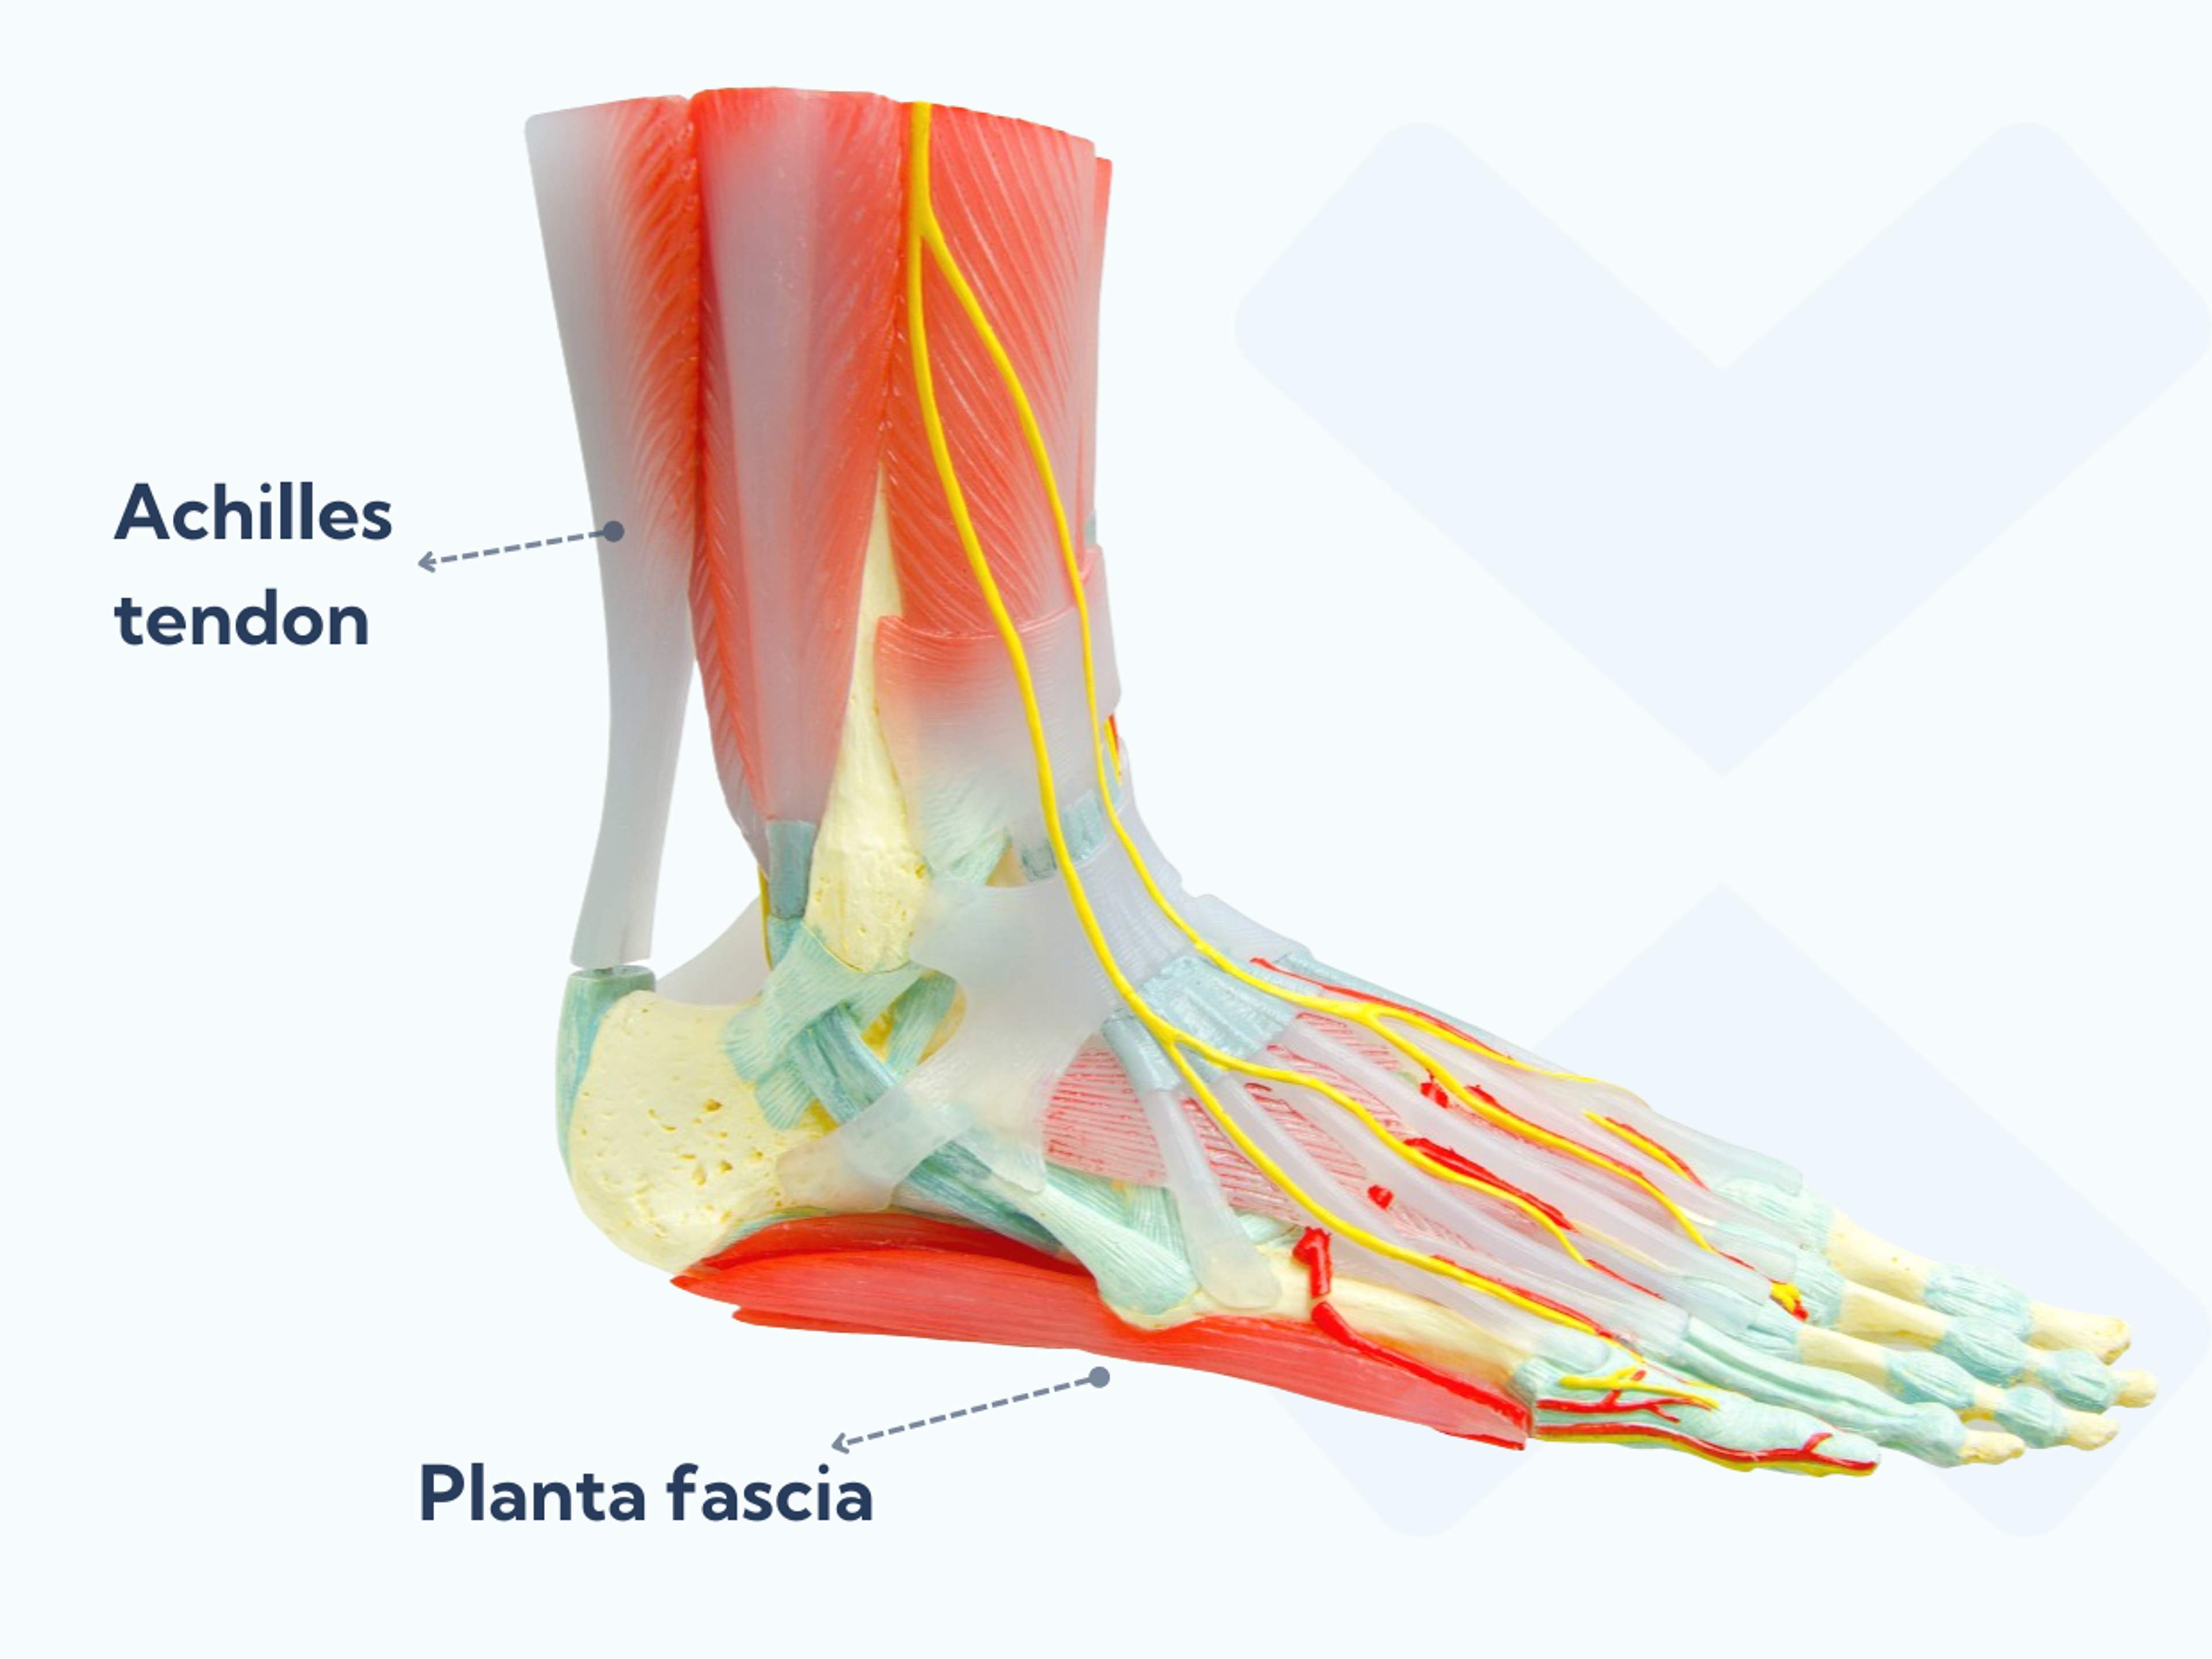 The plantar fascia runs from your heel bone to your toes and stops your arch from collapsing when you're upright. The Achilles tendon runs from your calf muscles and attaches into the back of your heel.